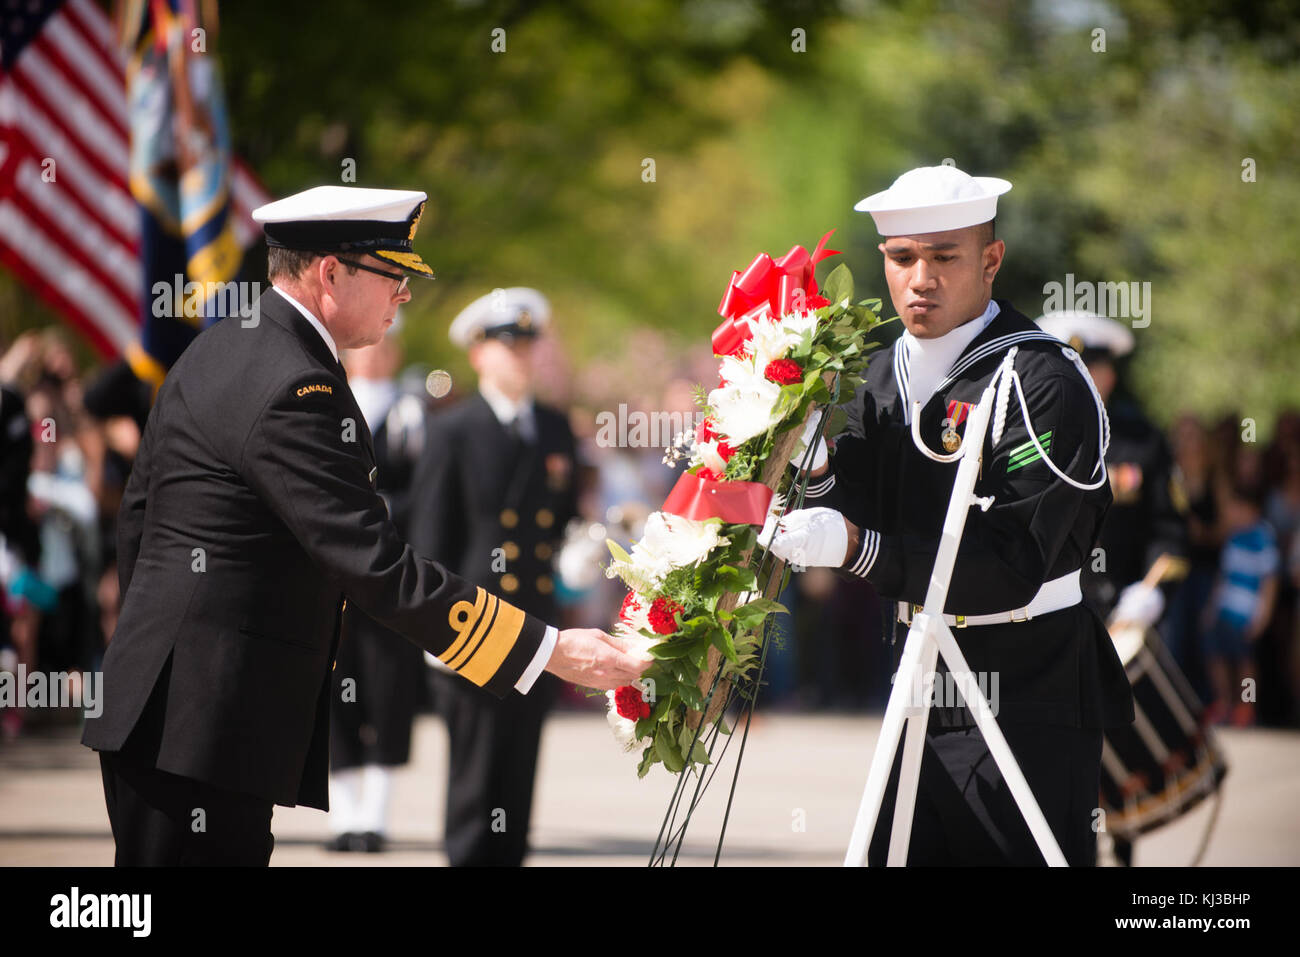 Commander of the Royal Canadian Navy lays a wreath at Tomb of the Unknown Soldier, Arlington National Cemetery (16595275674) Stock Photo